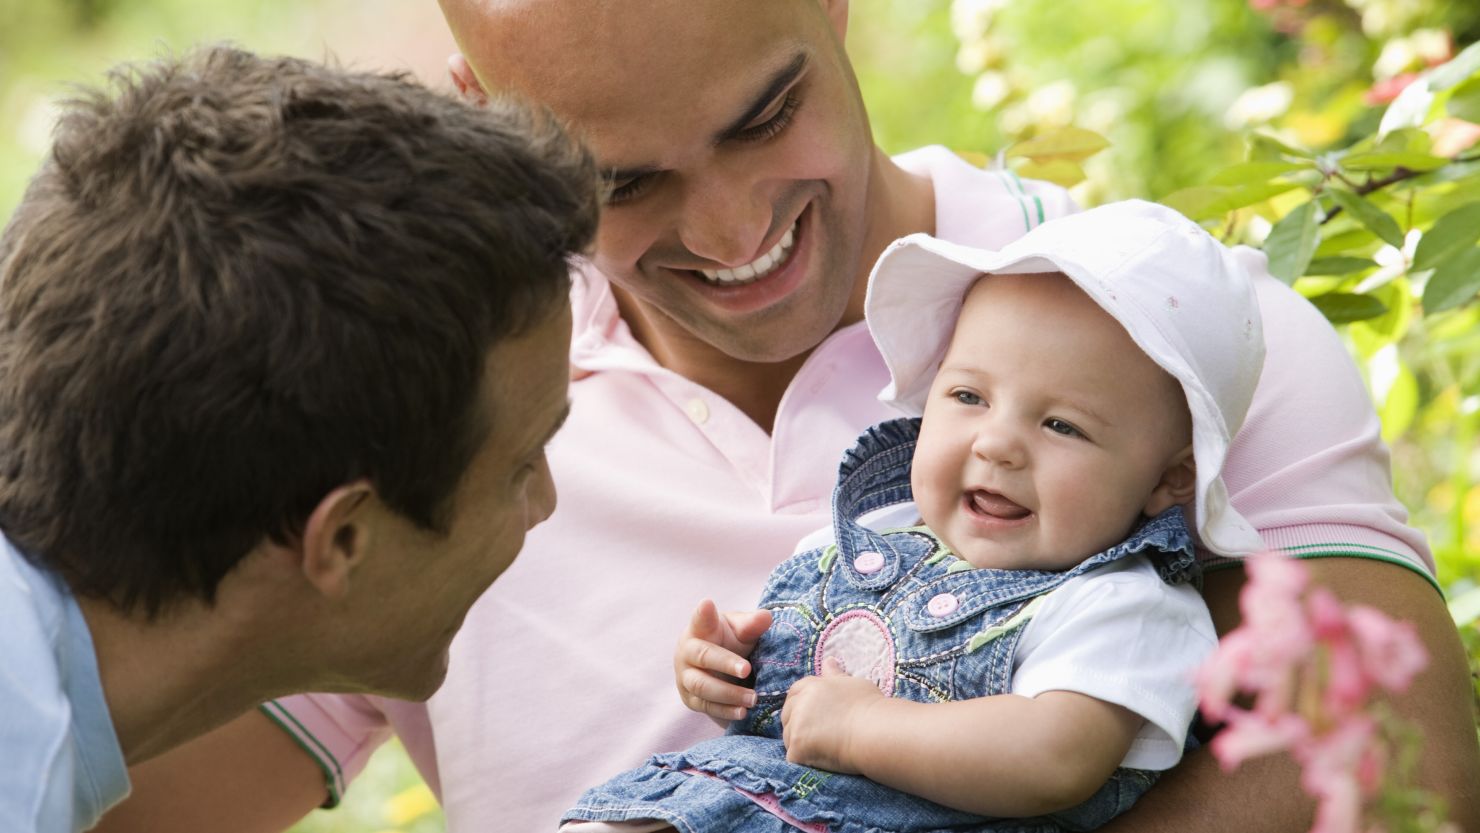 Same-sex couples sometimes enlist friends to help them conceive a child.